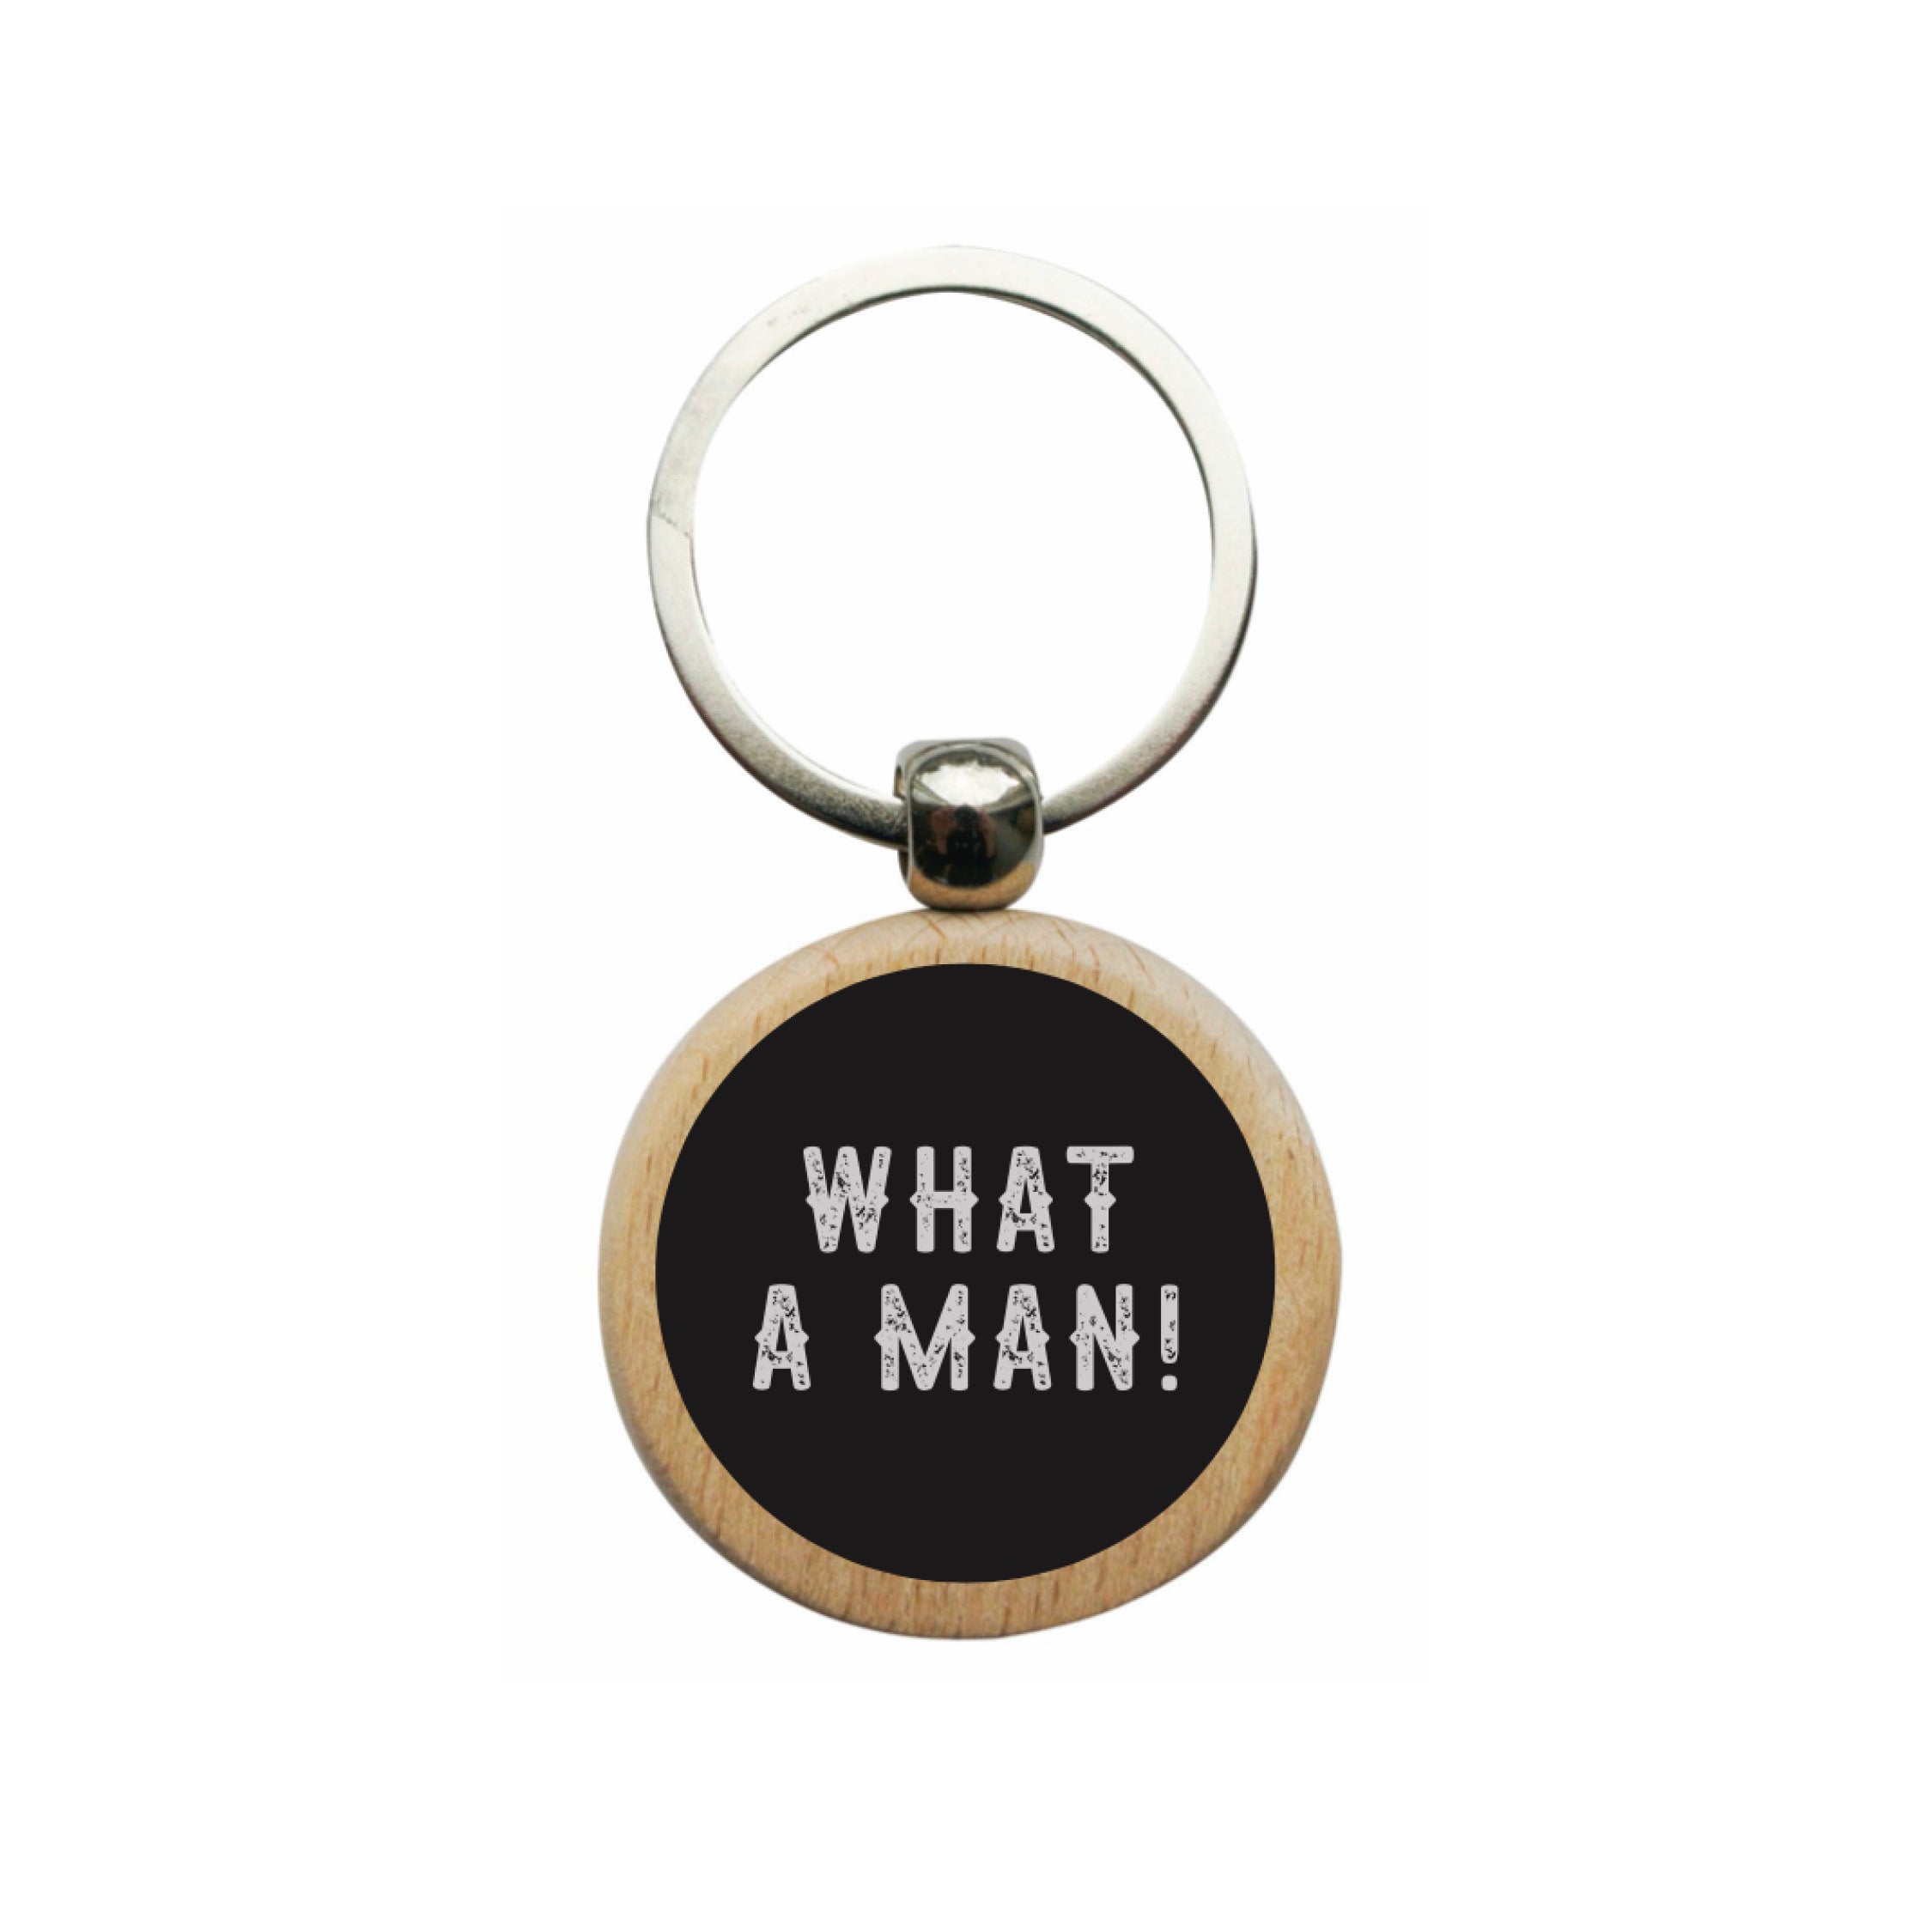 Wooden Key Rings - WHAT A MAN